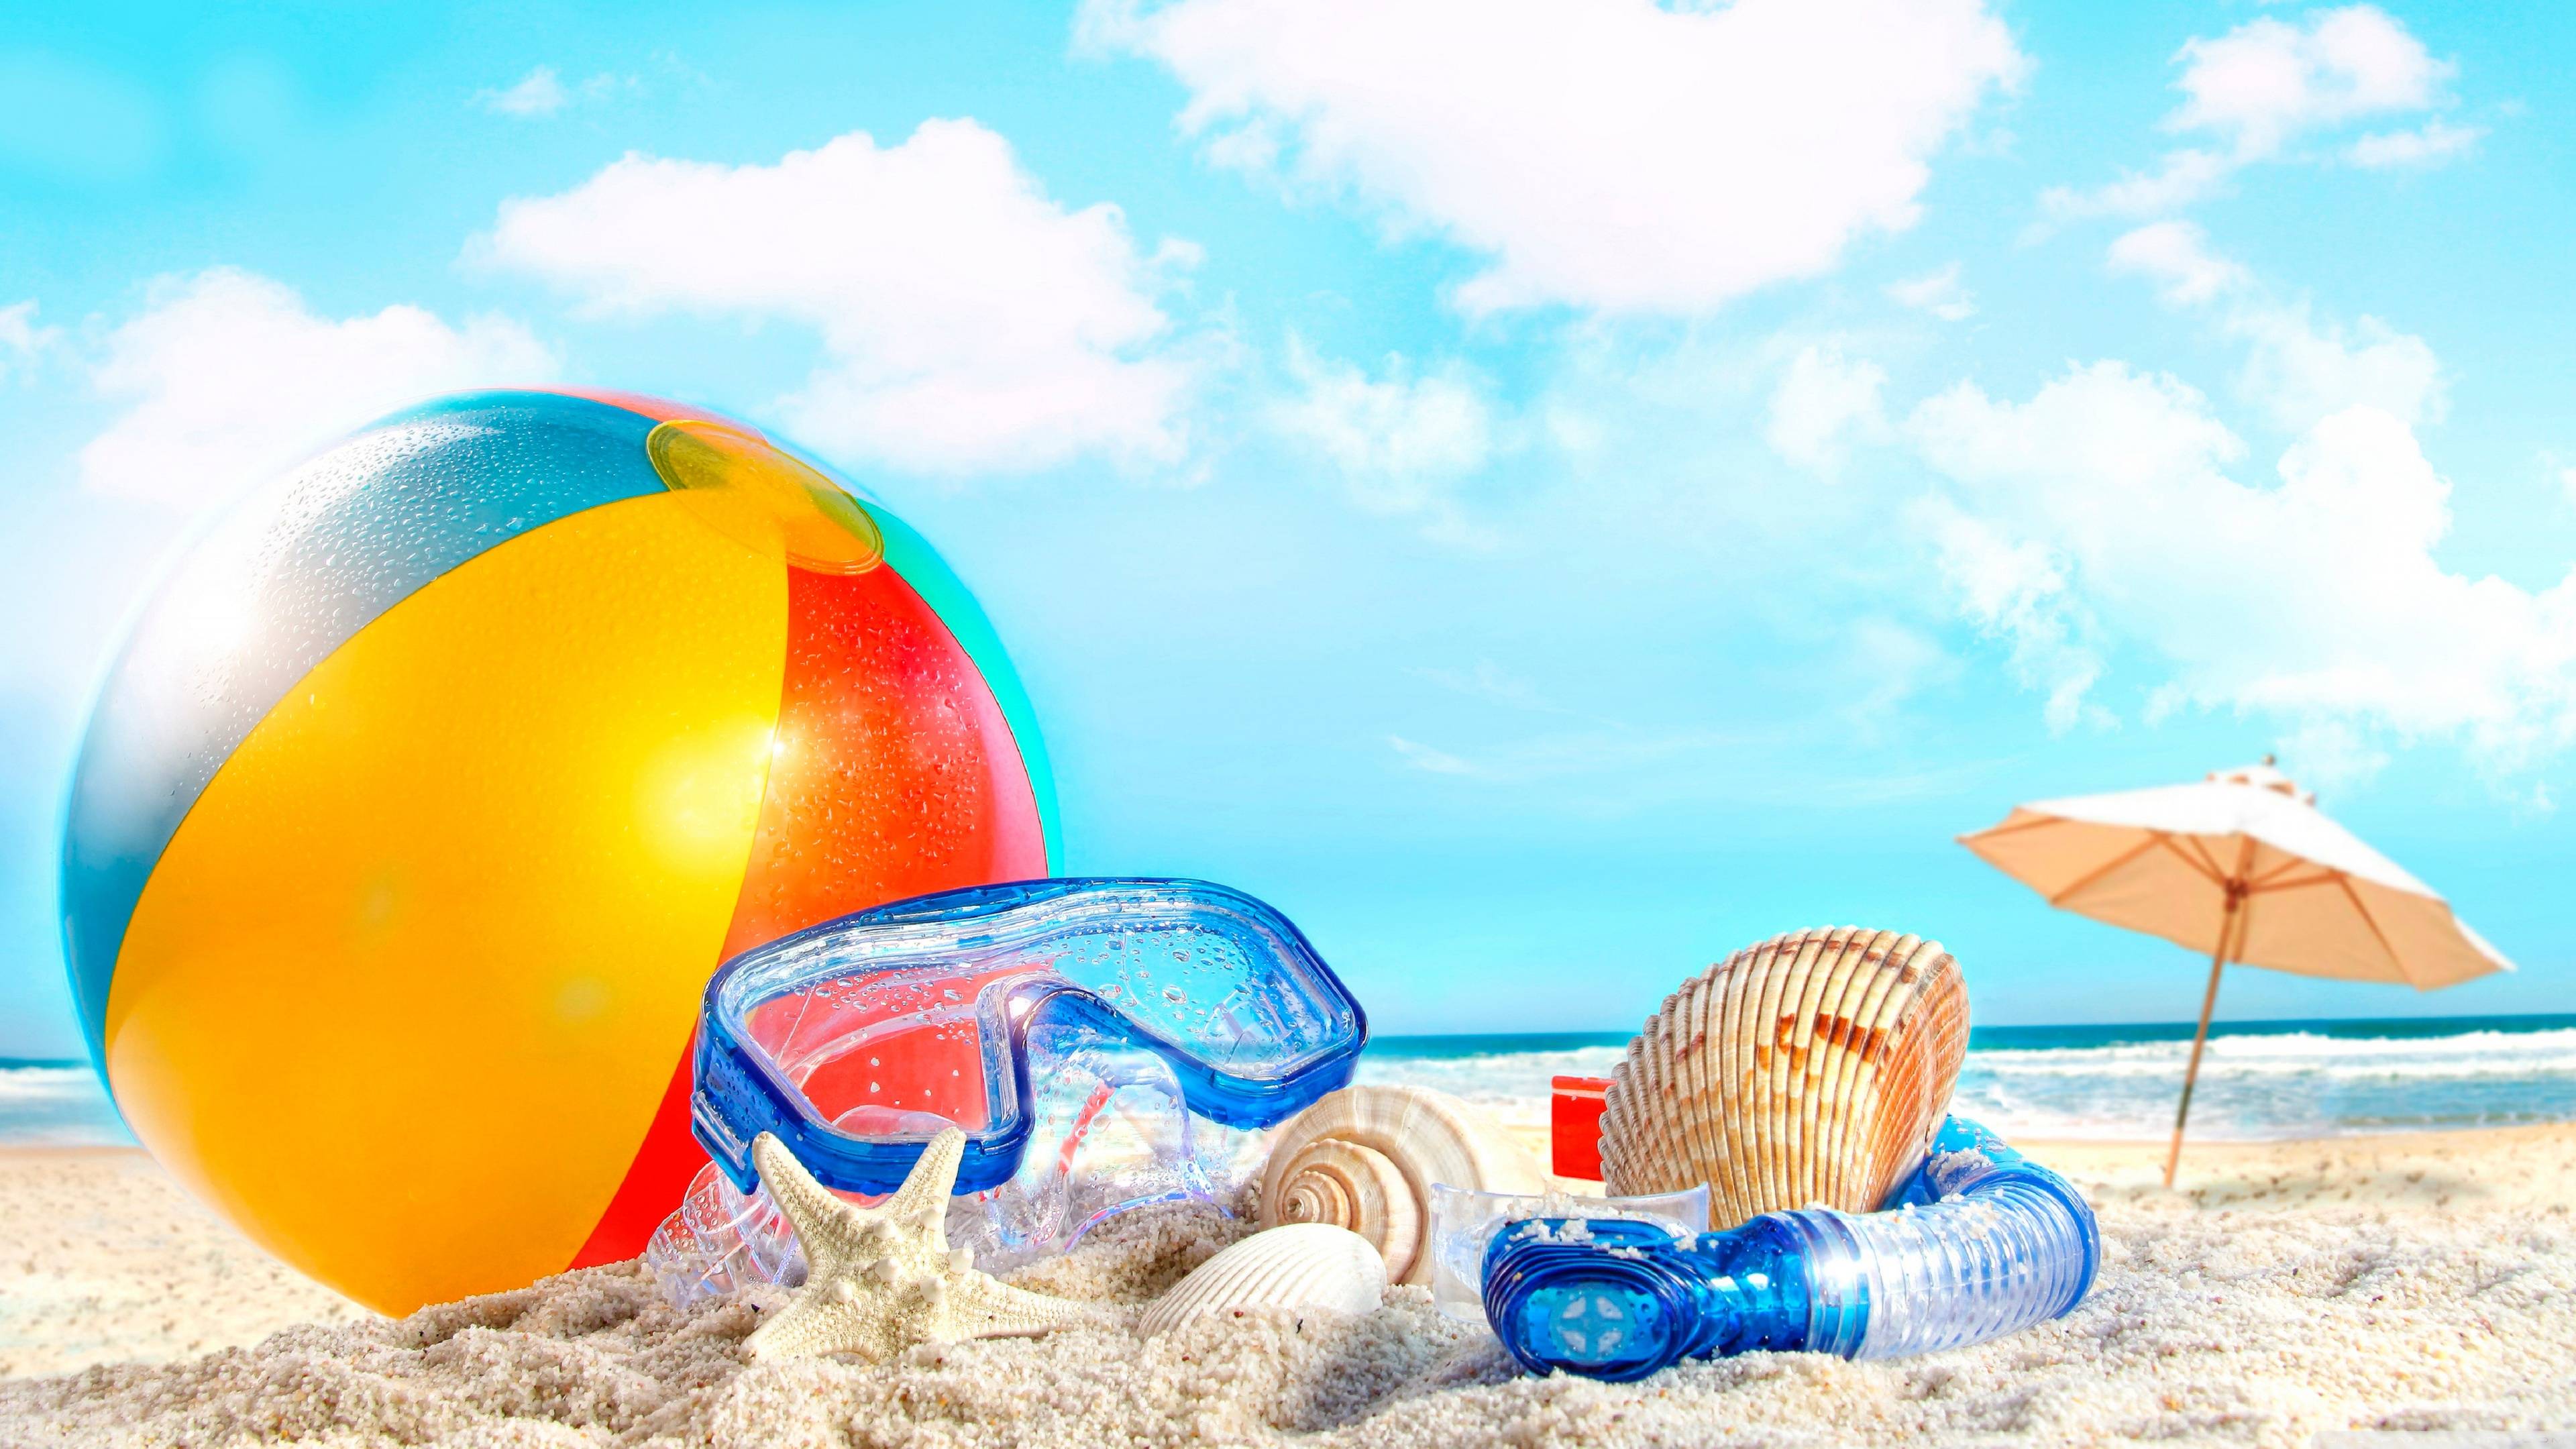 Summer Picture Background 1 HD Wallpaper. Hdimges